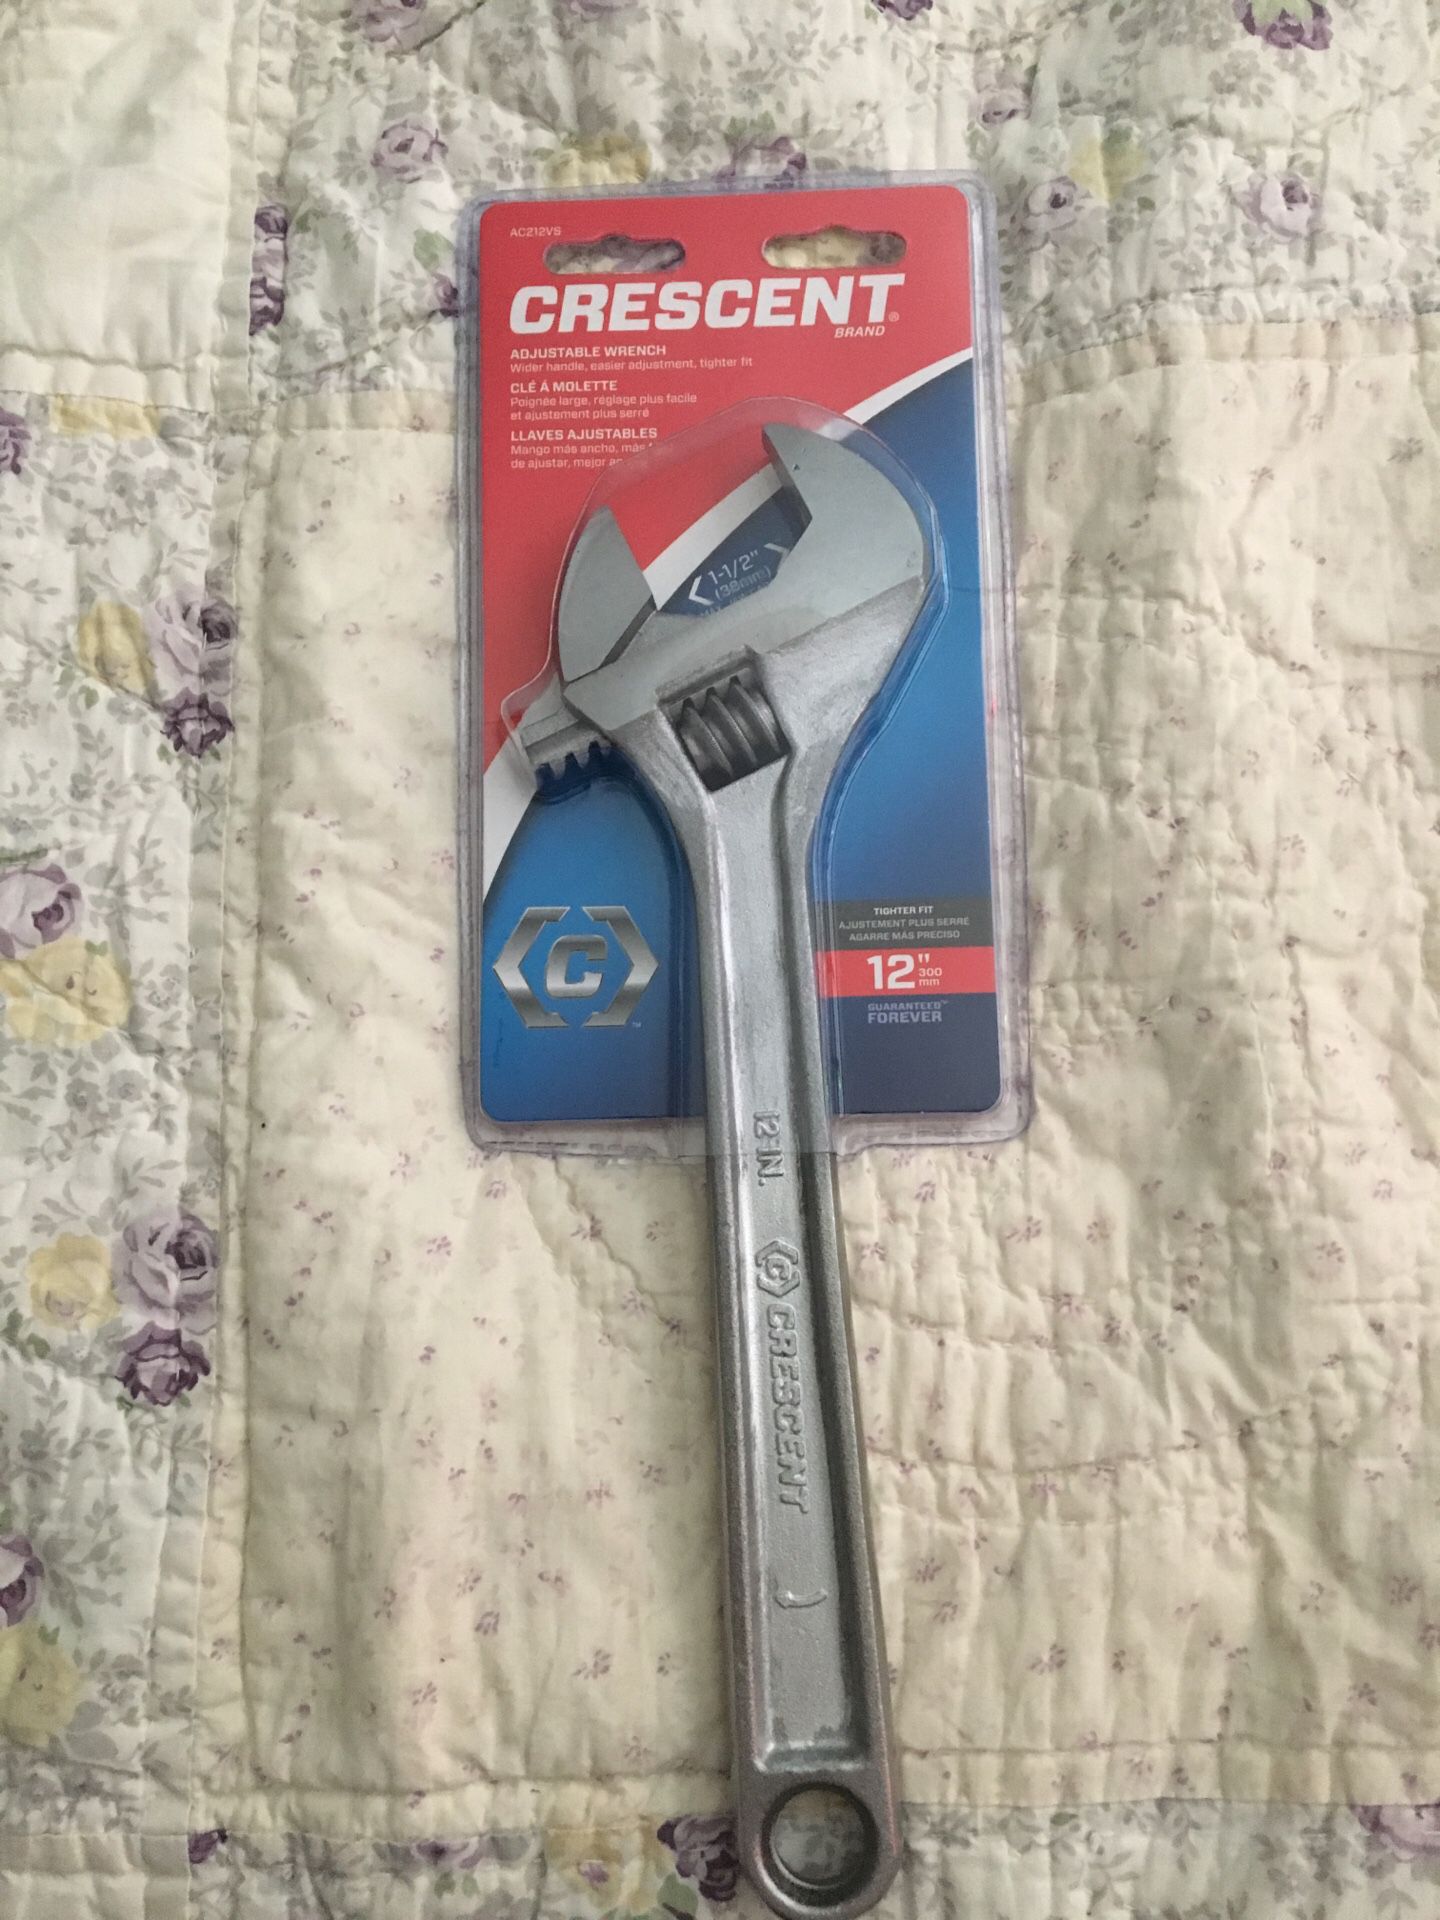 12” Crescent Adjustable Wrench.